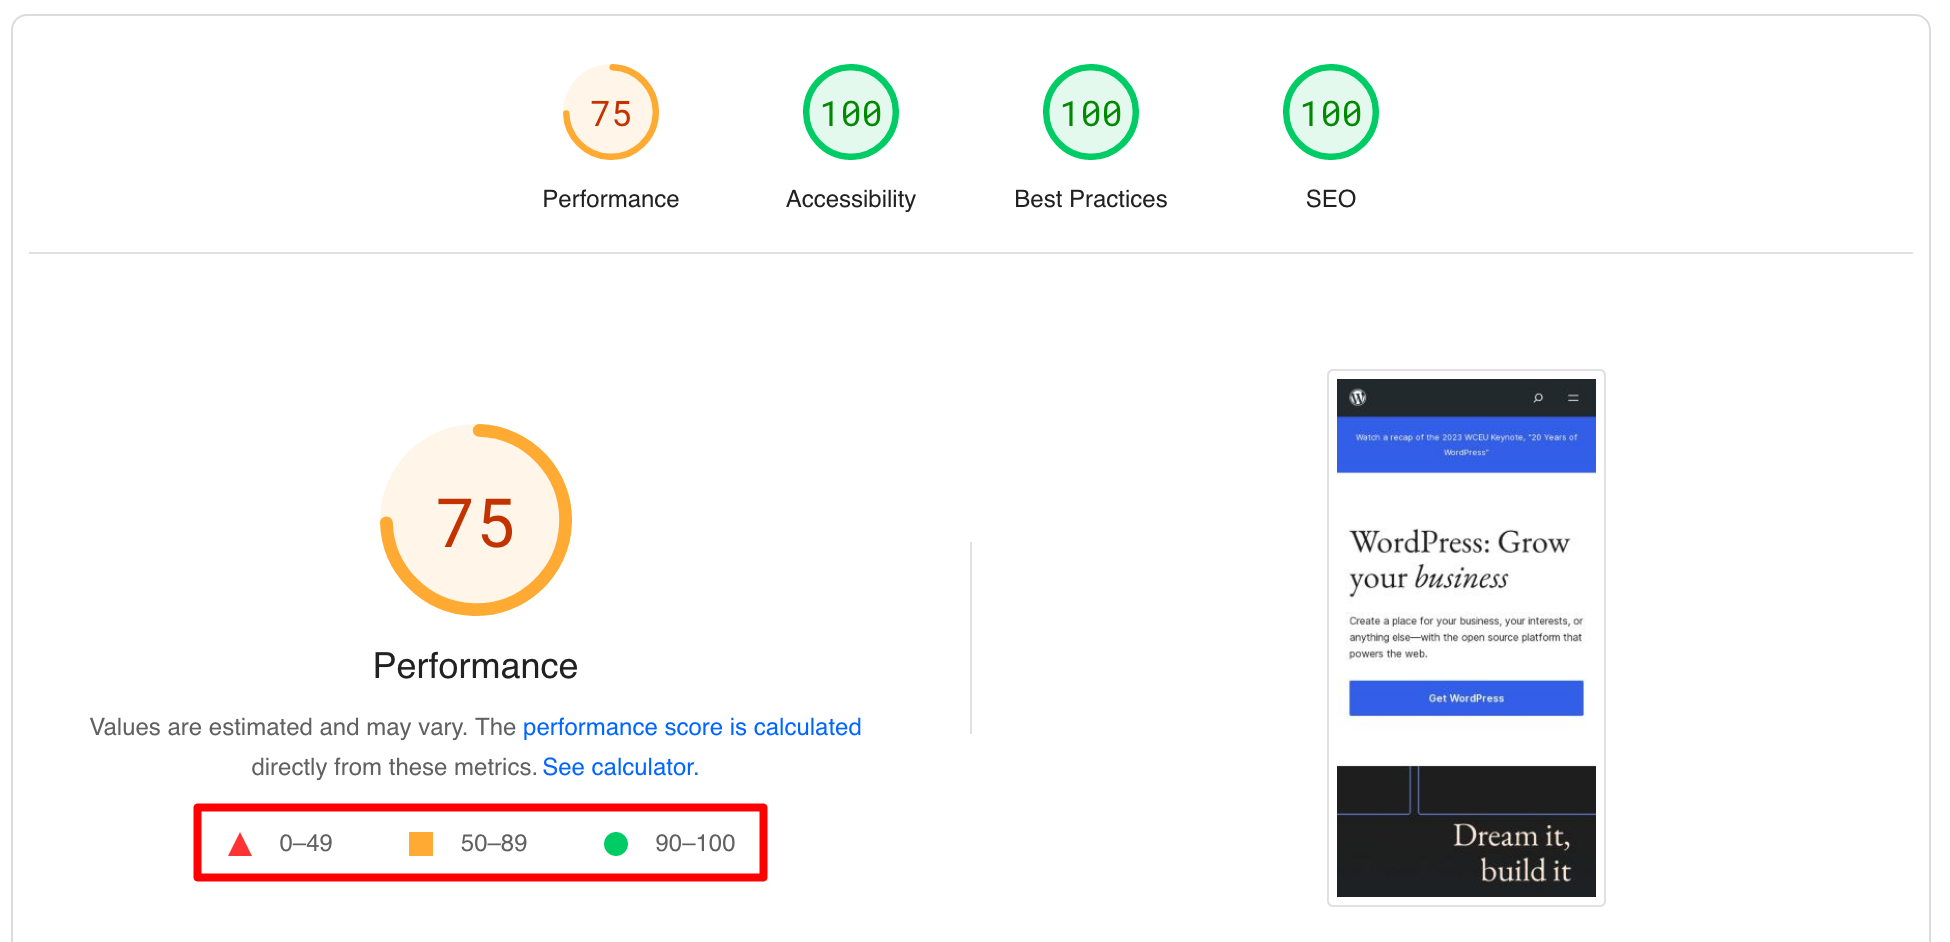 PageSpeed Insights gives your page a score for performance, accessibility, best practices, and SEO.